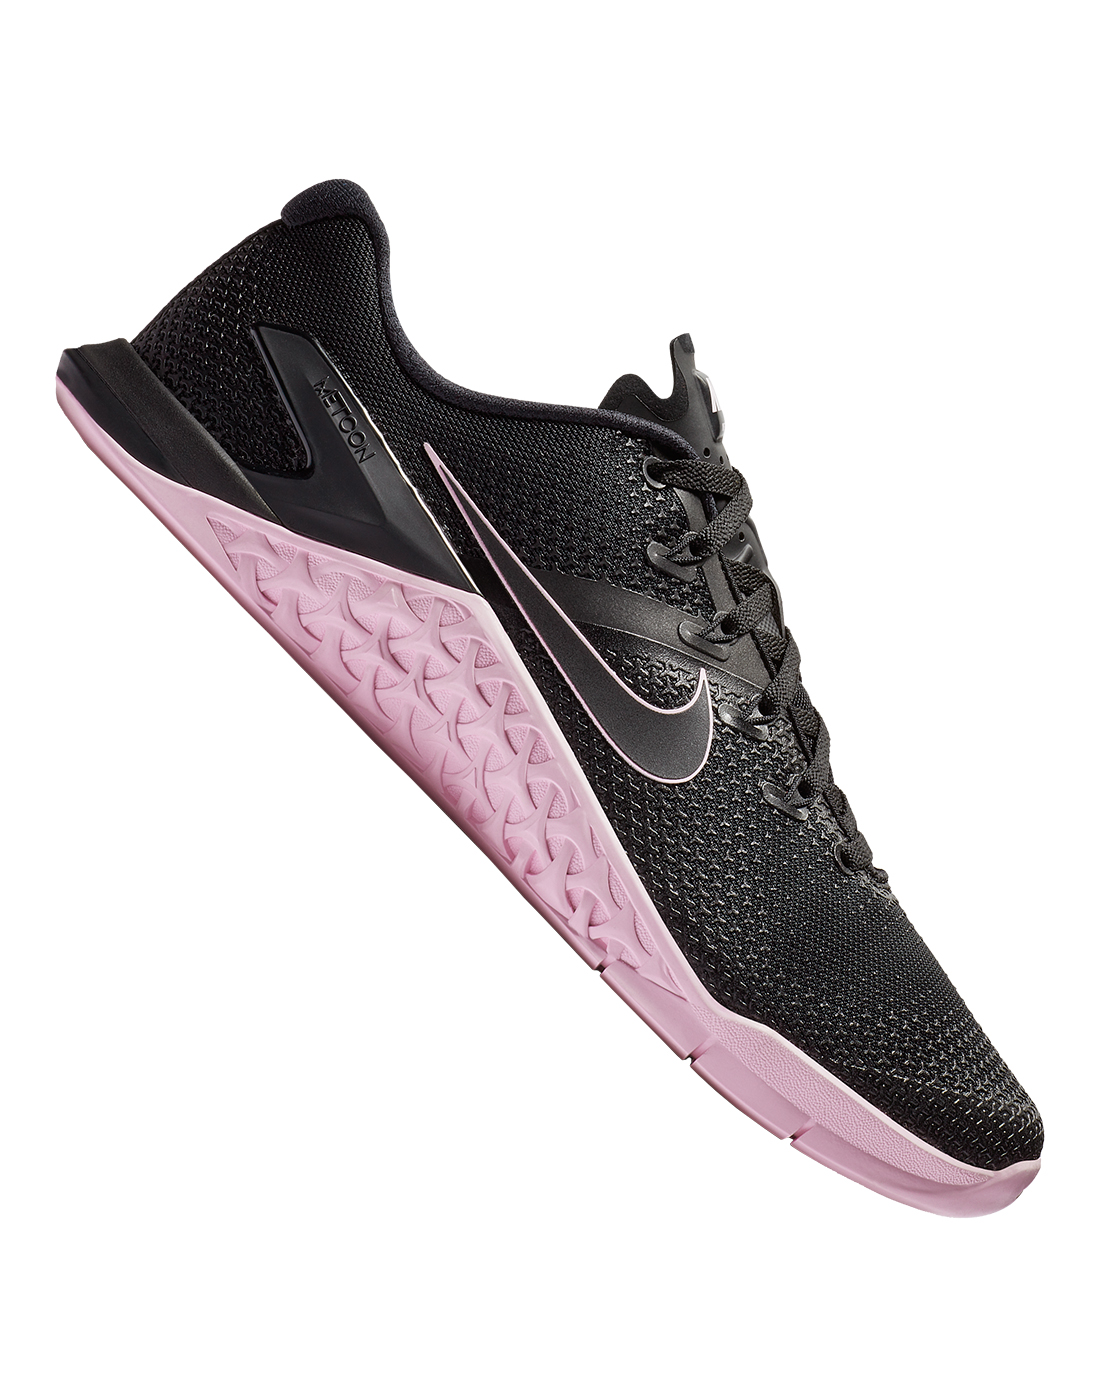 black and pink metcons